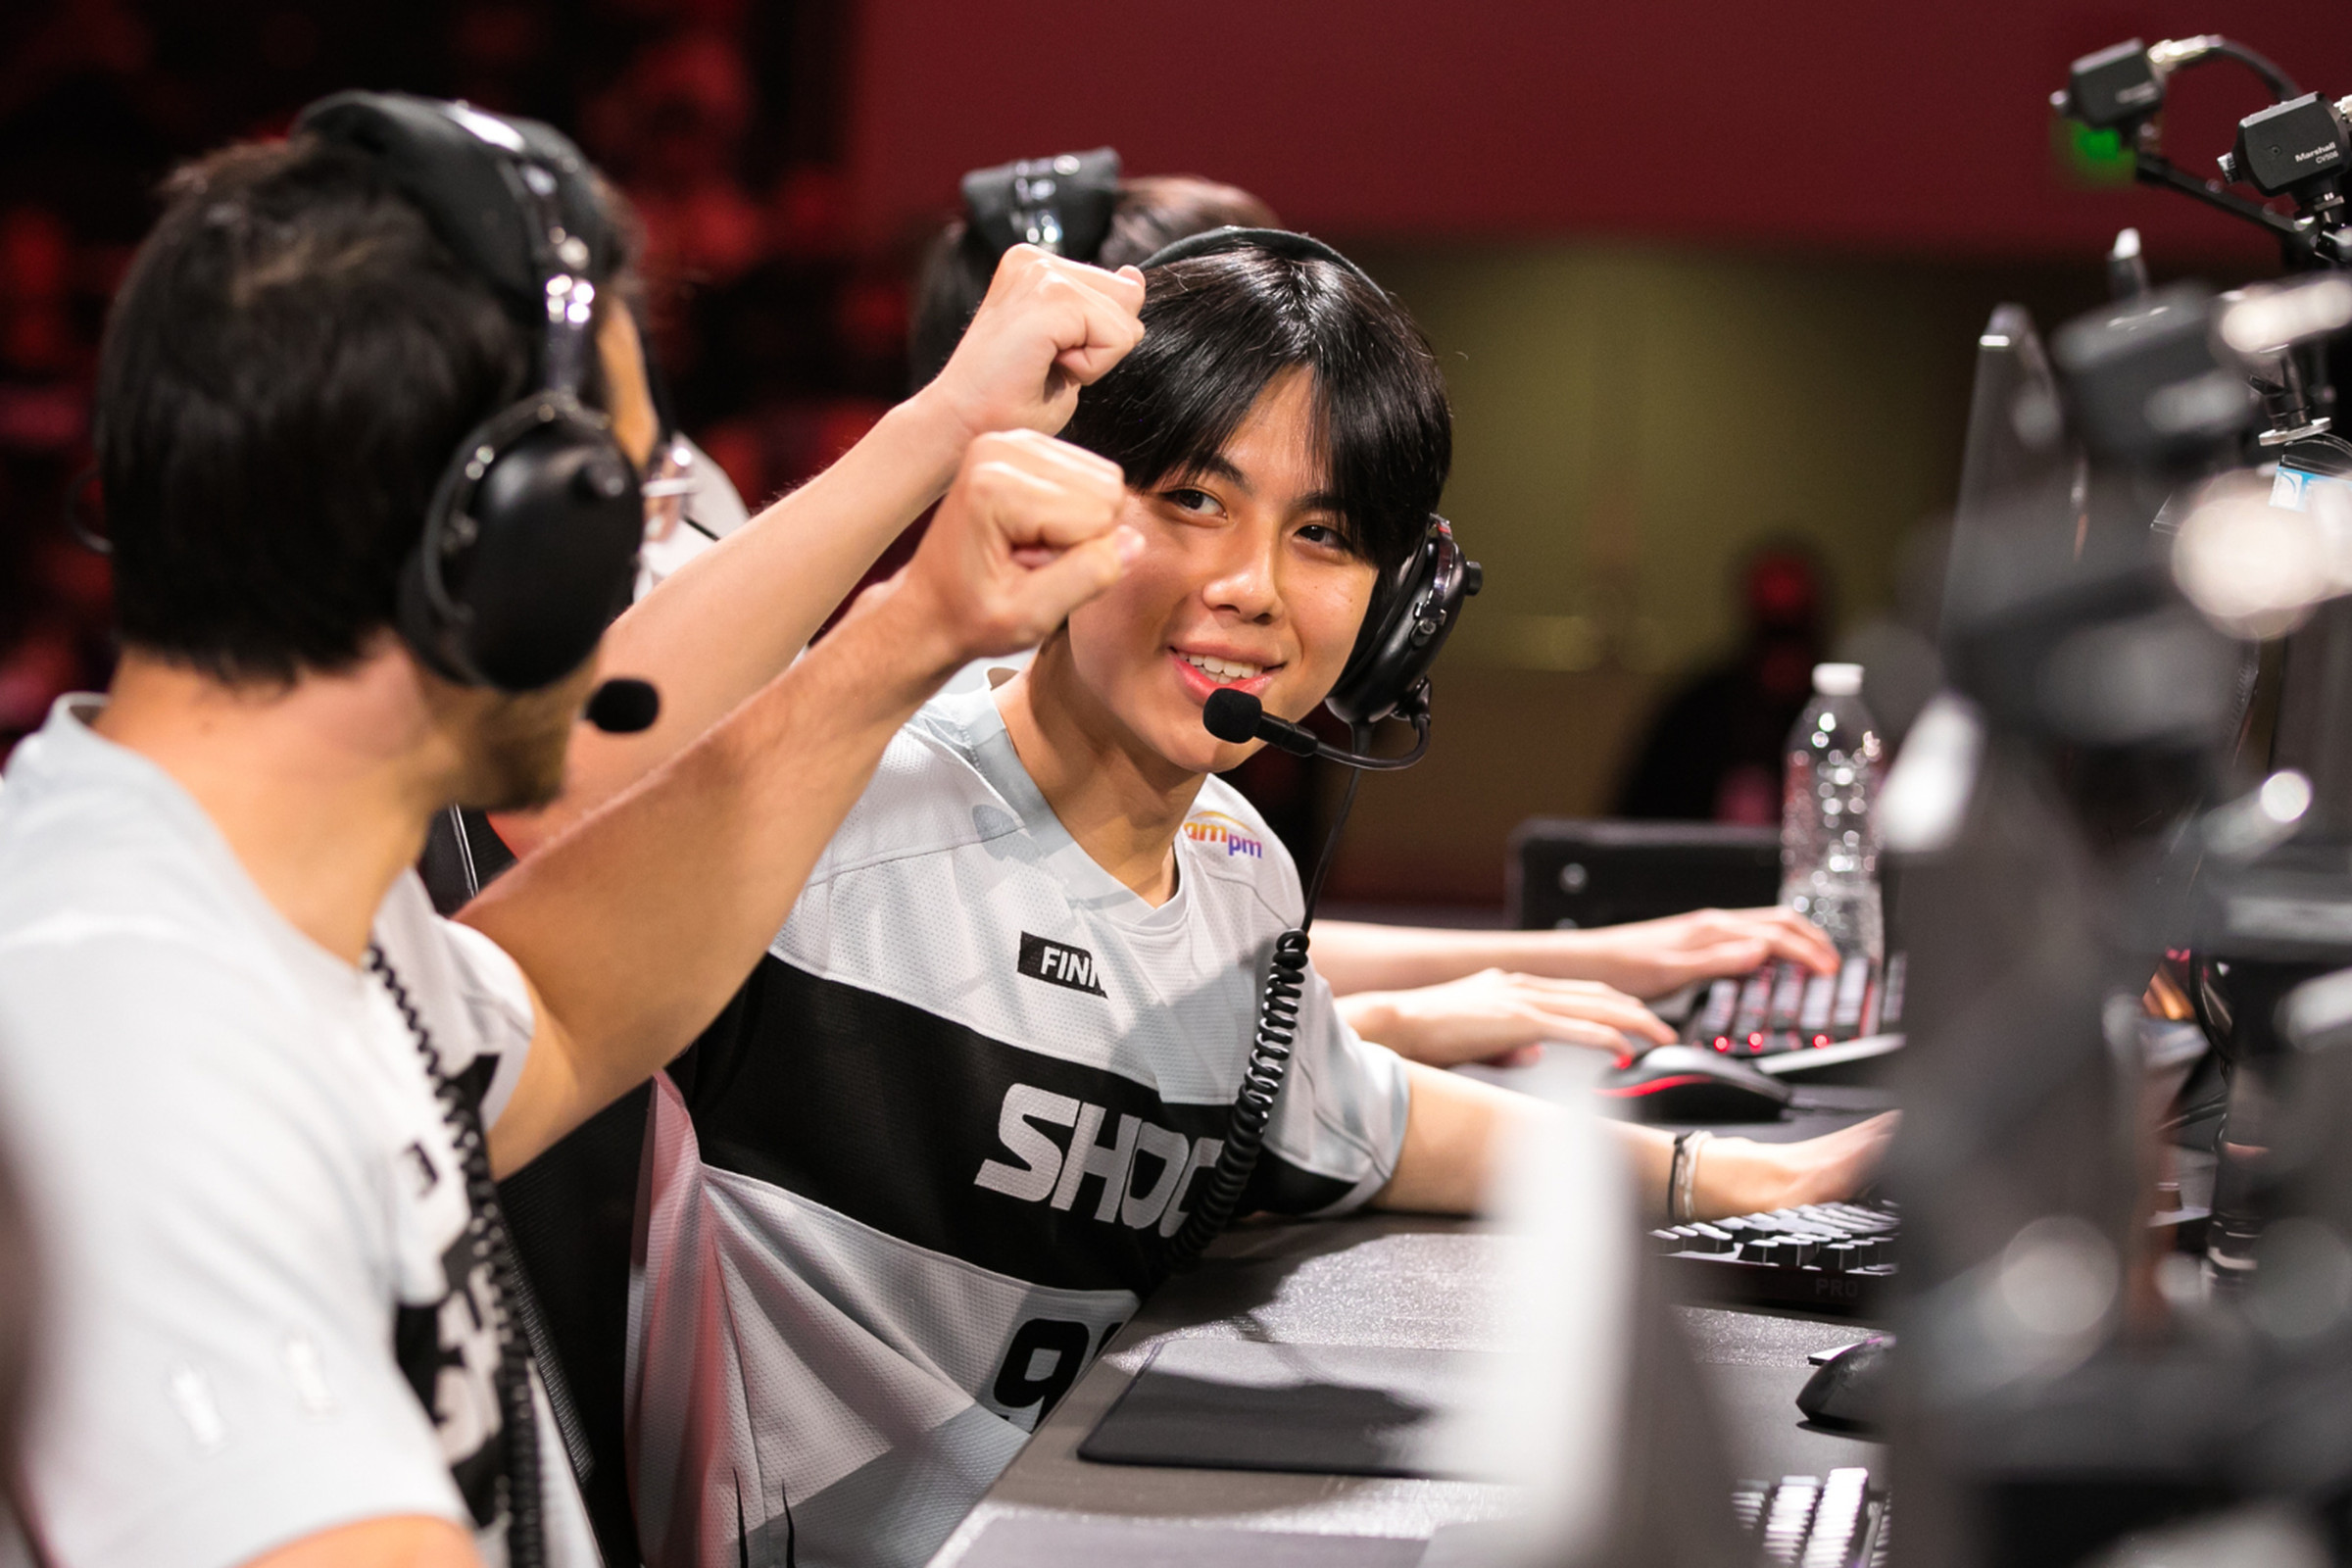 Photo from the Overwatch League 2022 Grand Finals featuring Se-jin “FINN” Oh fist-bumping a teammate